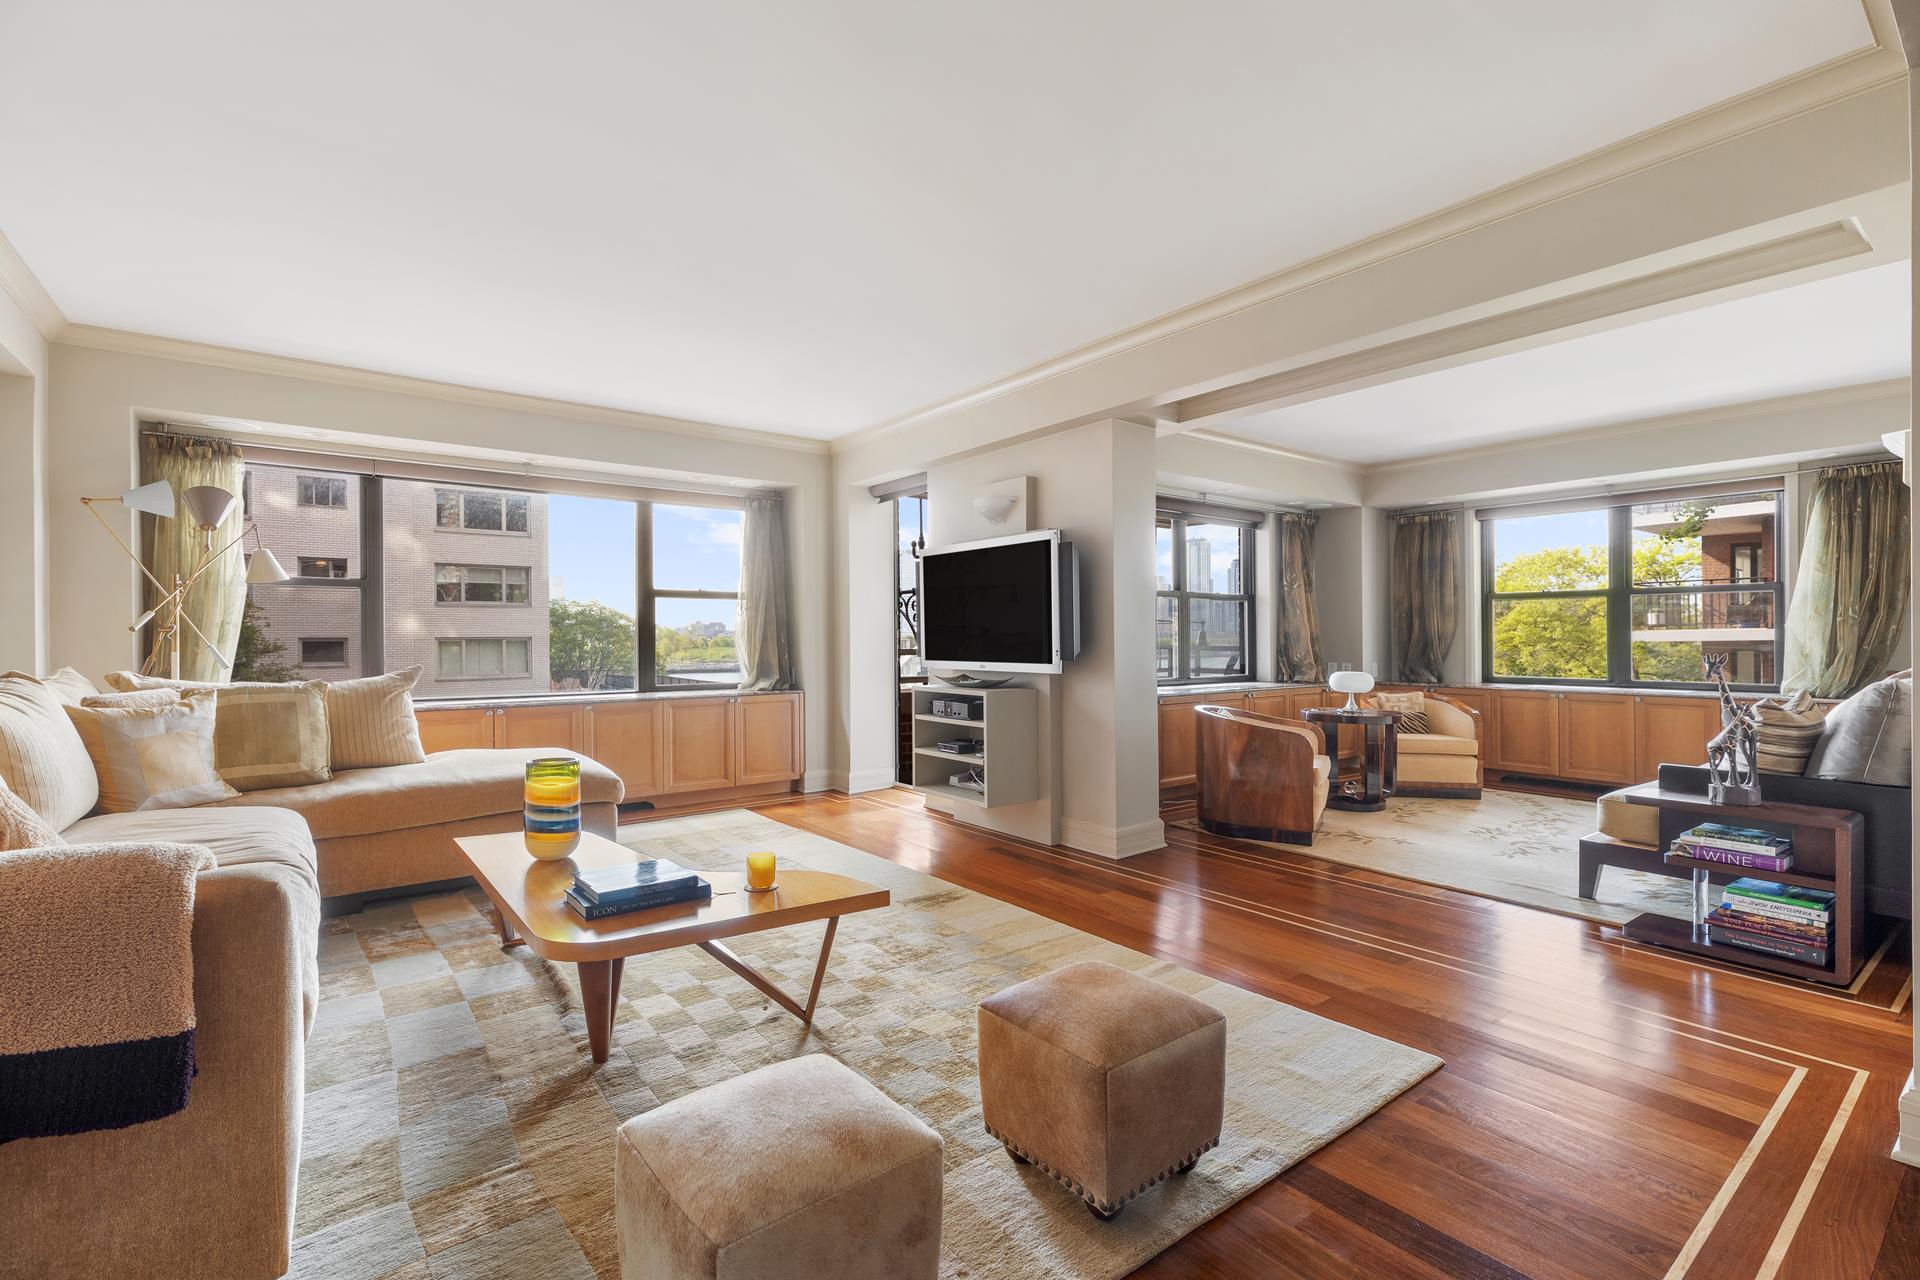 50 Sutton Place 3J, Sutton, Midtown East, NYC - 2 Bedrooms  
2 Bathrooms  
6 Rooms - 